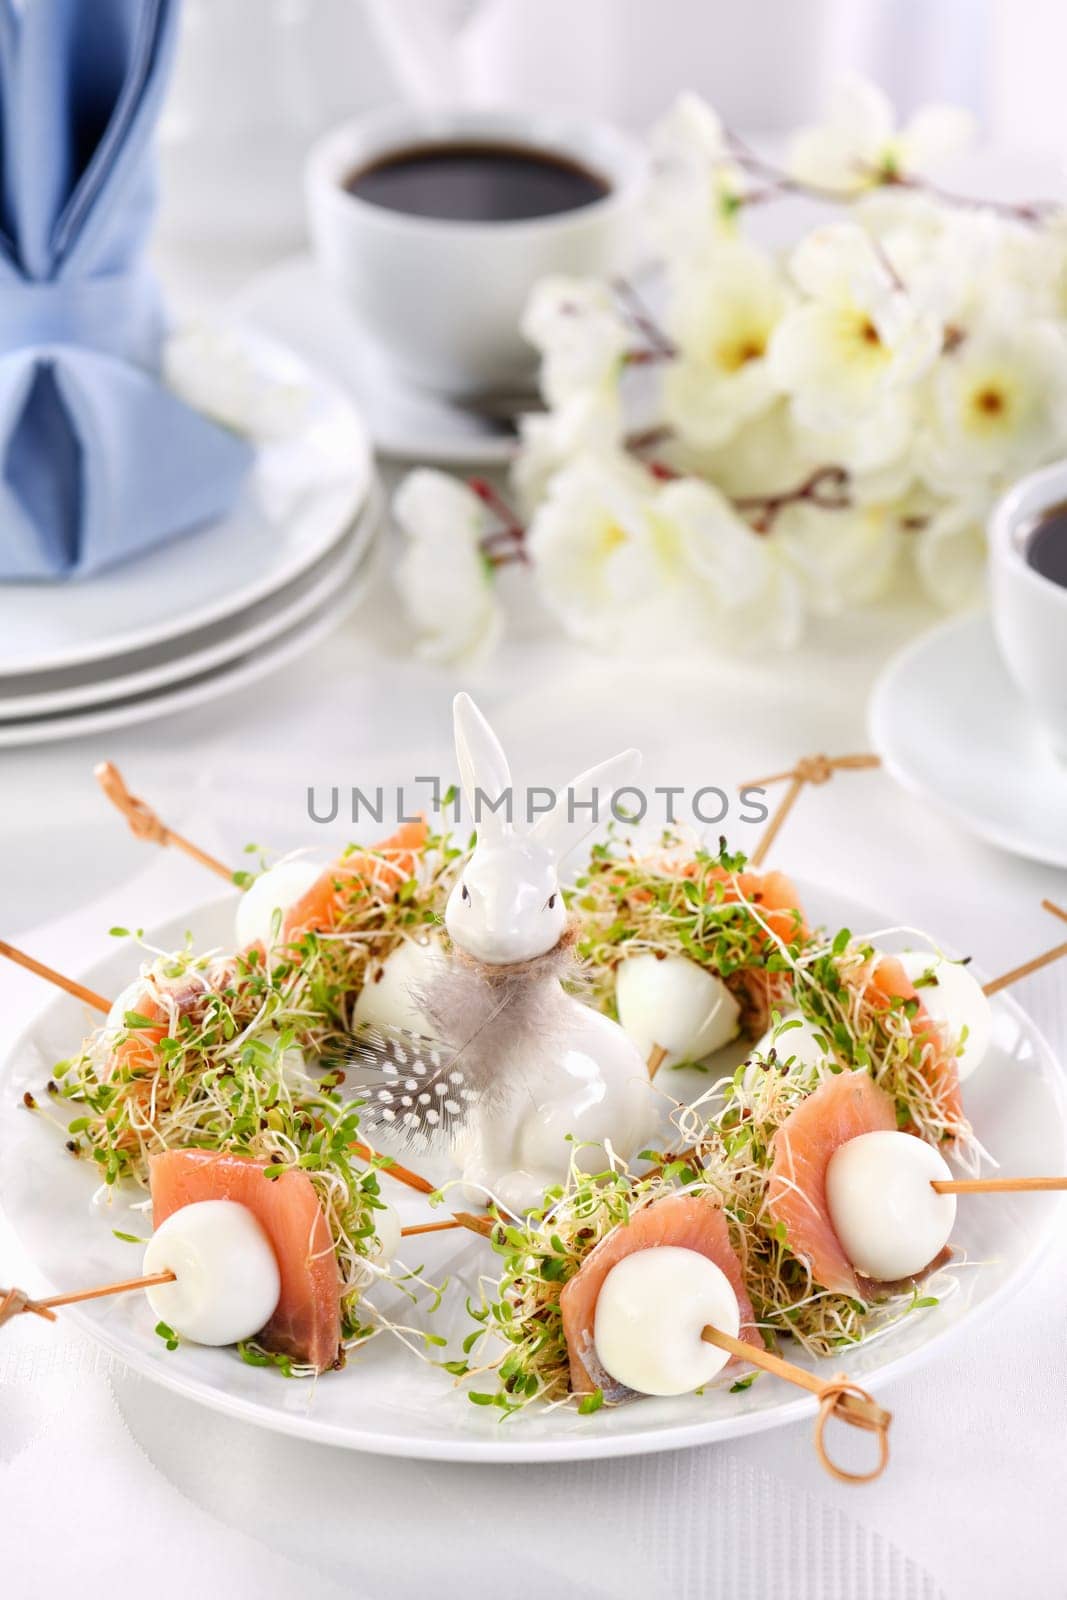 Appetizer quail egg stuffed with alfalfa sprouts with a slice of salmon, on a wooden skewer. Buffet serving for the Easter table.